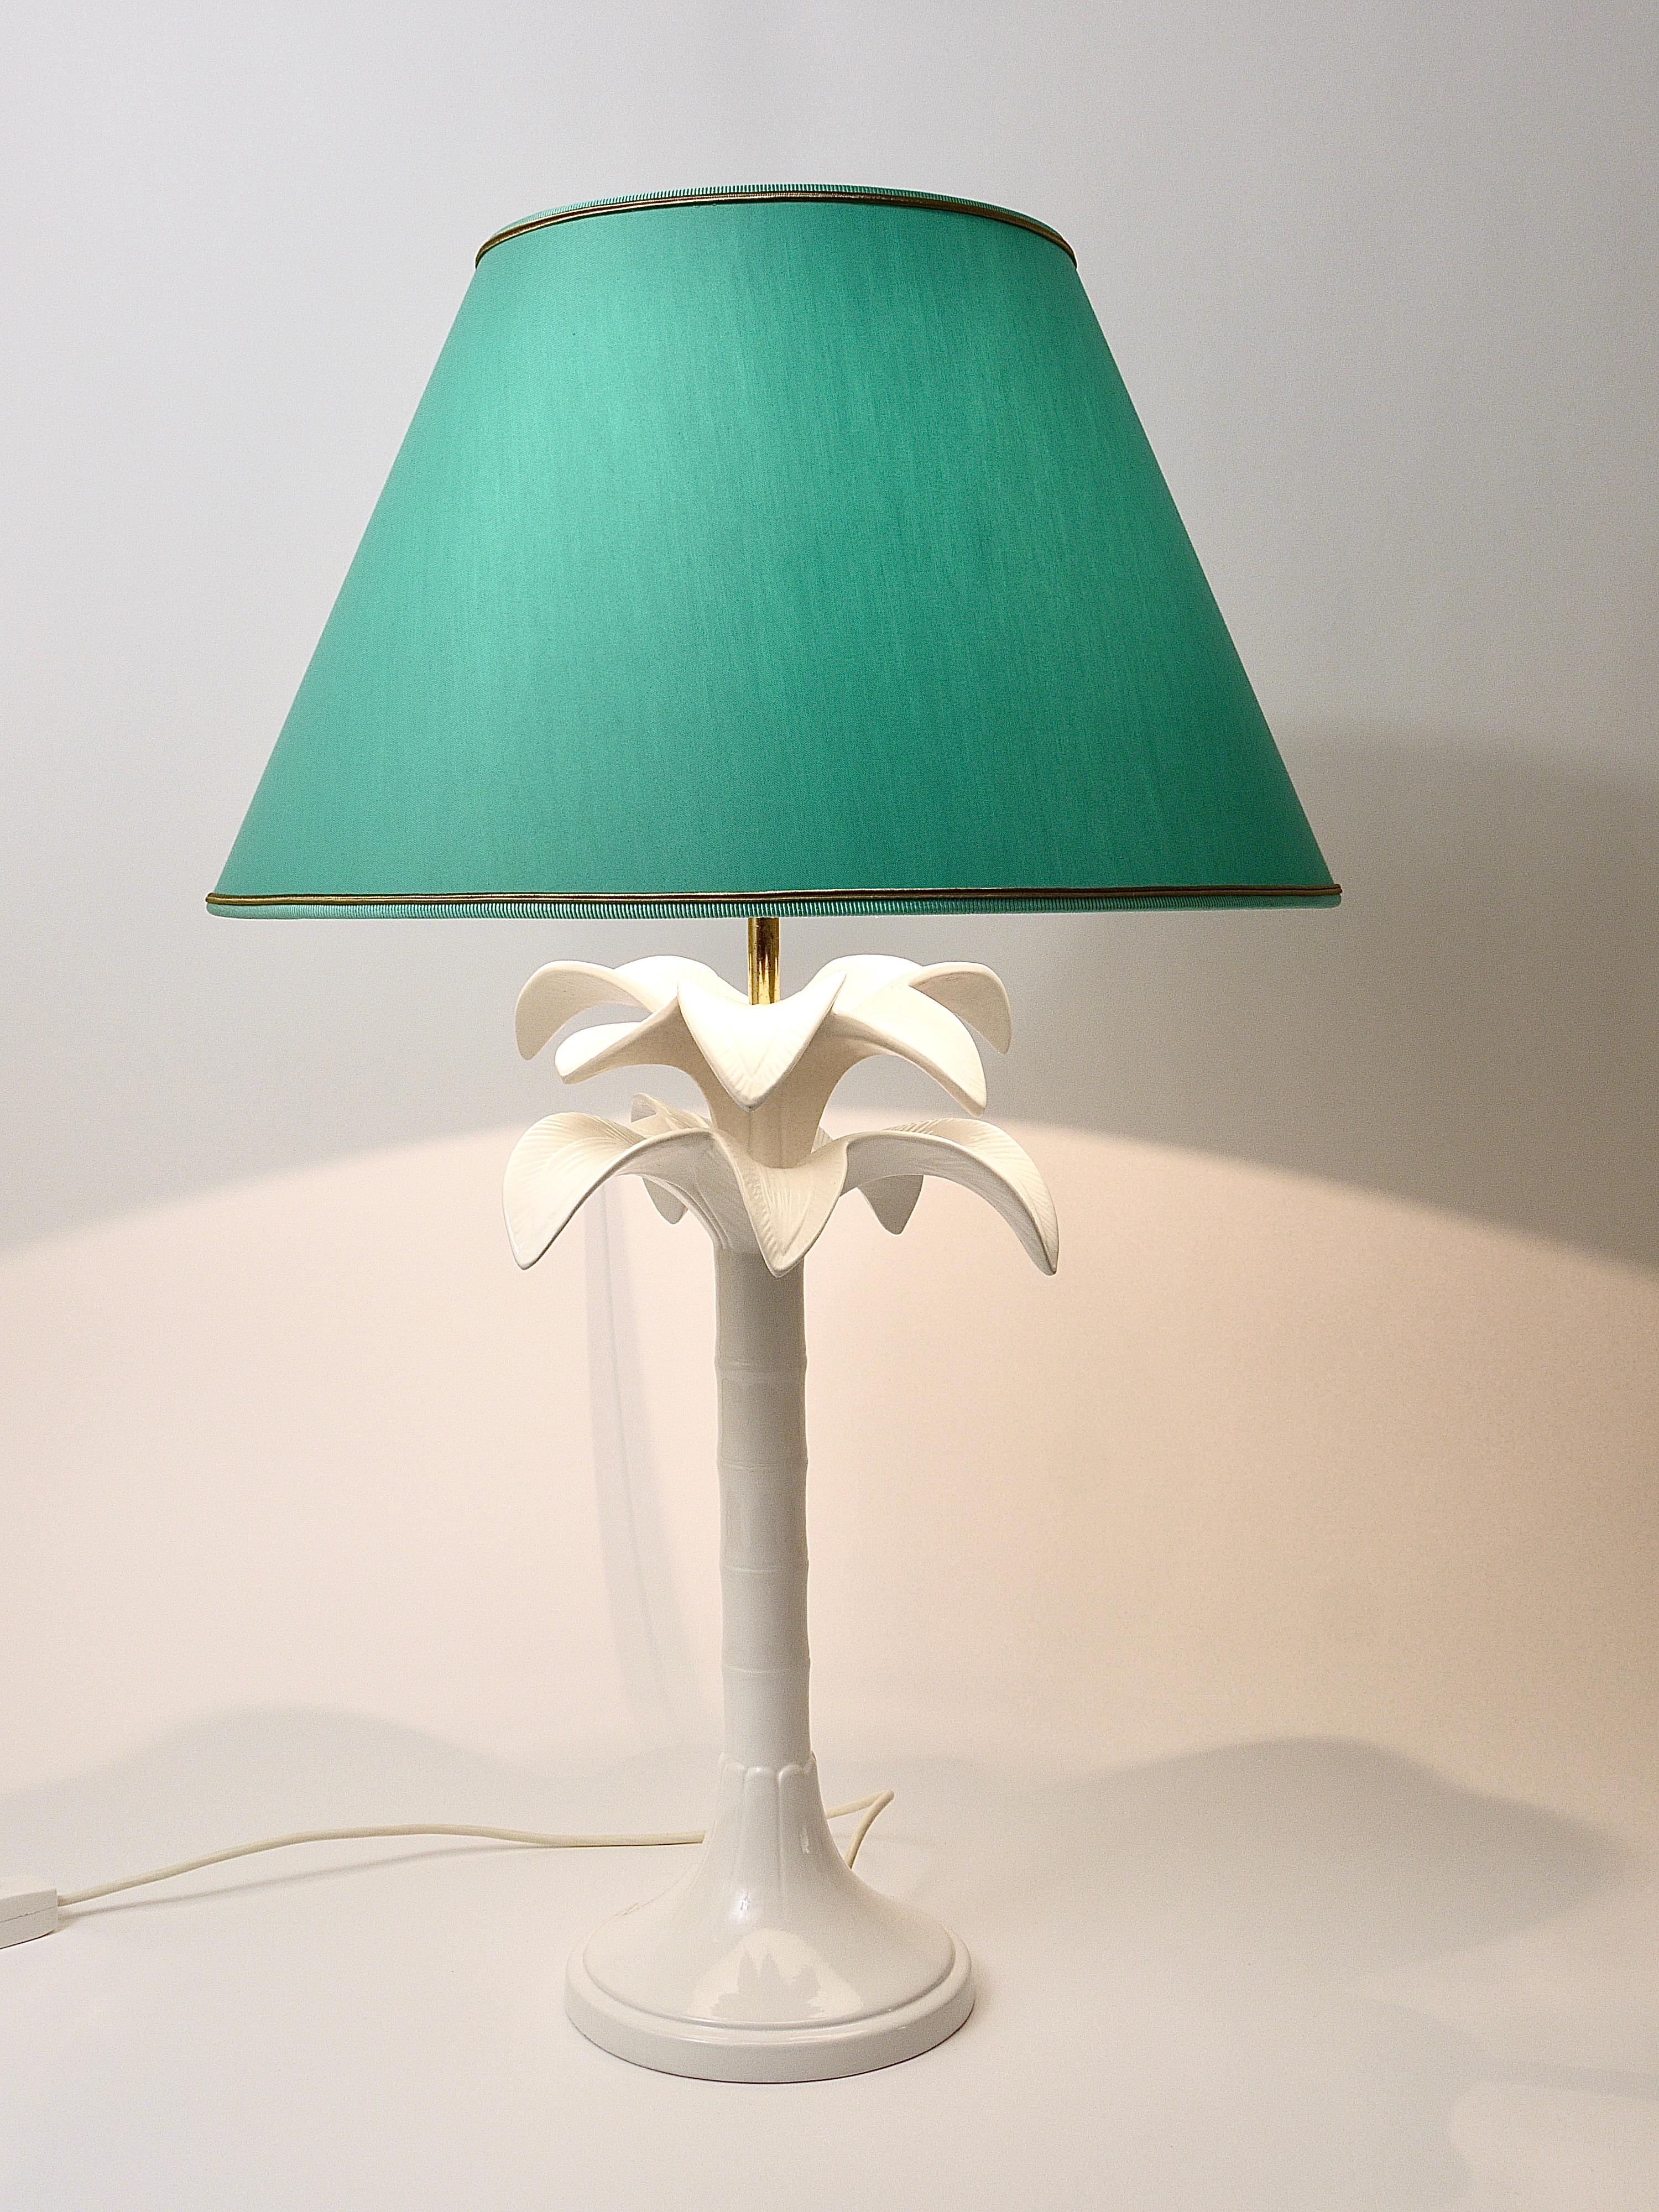 Beautiful and decorative table lamp / side lamp in the shape of a palm tree from the 1970s, designed by Tommasi Barbi, made in Italy. The base is made of white-glazed ceramic. The lamp comes with a refurbished lampshade by using the original